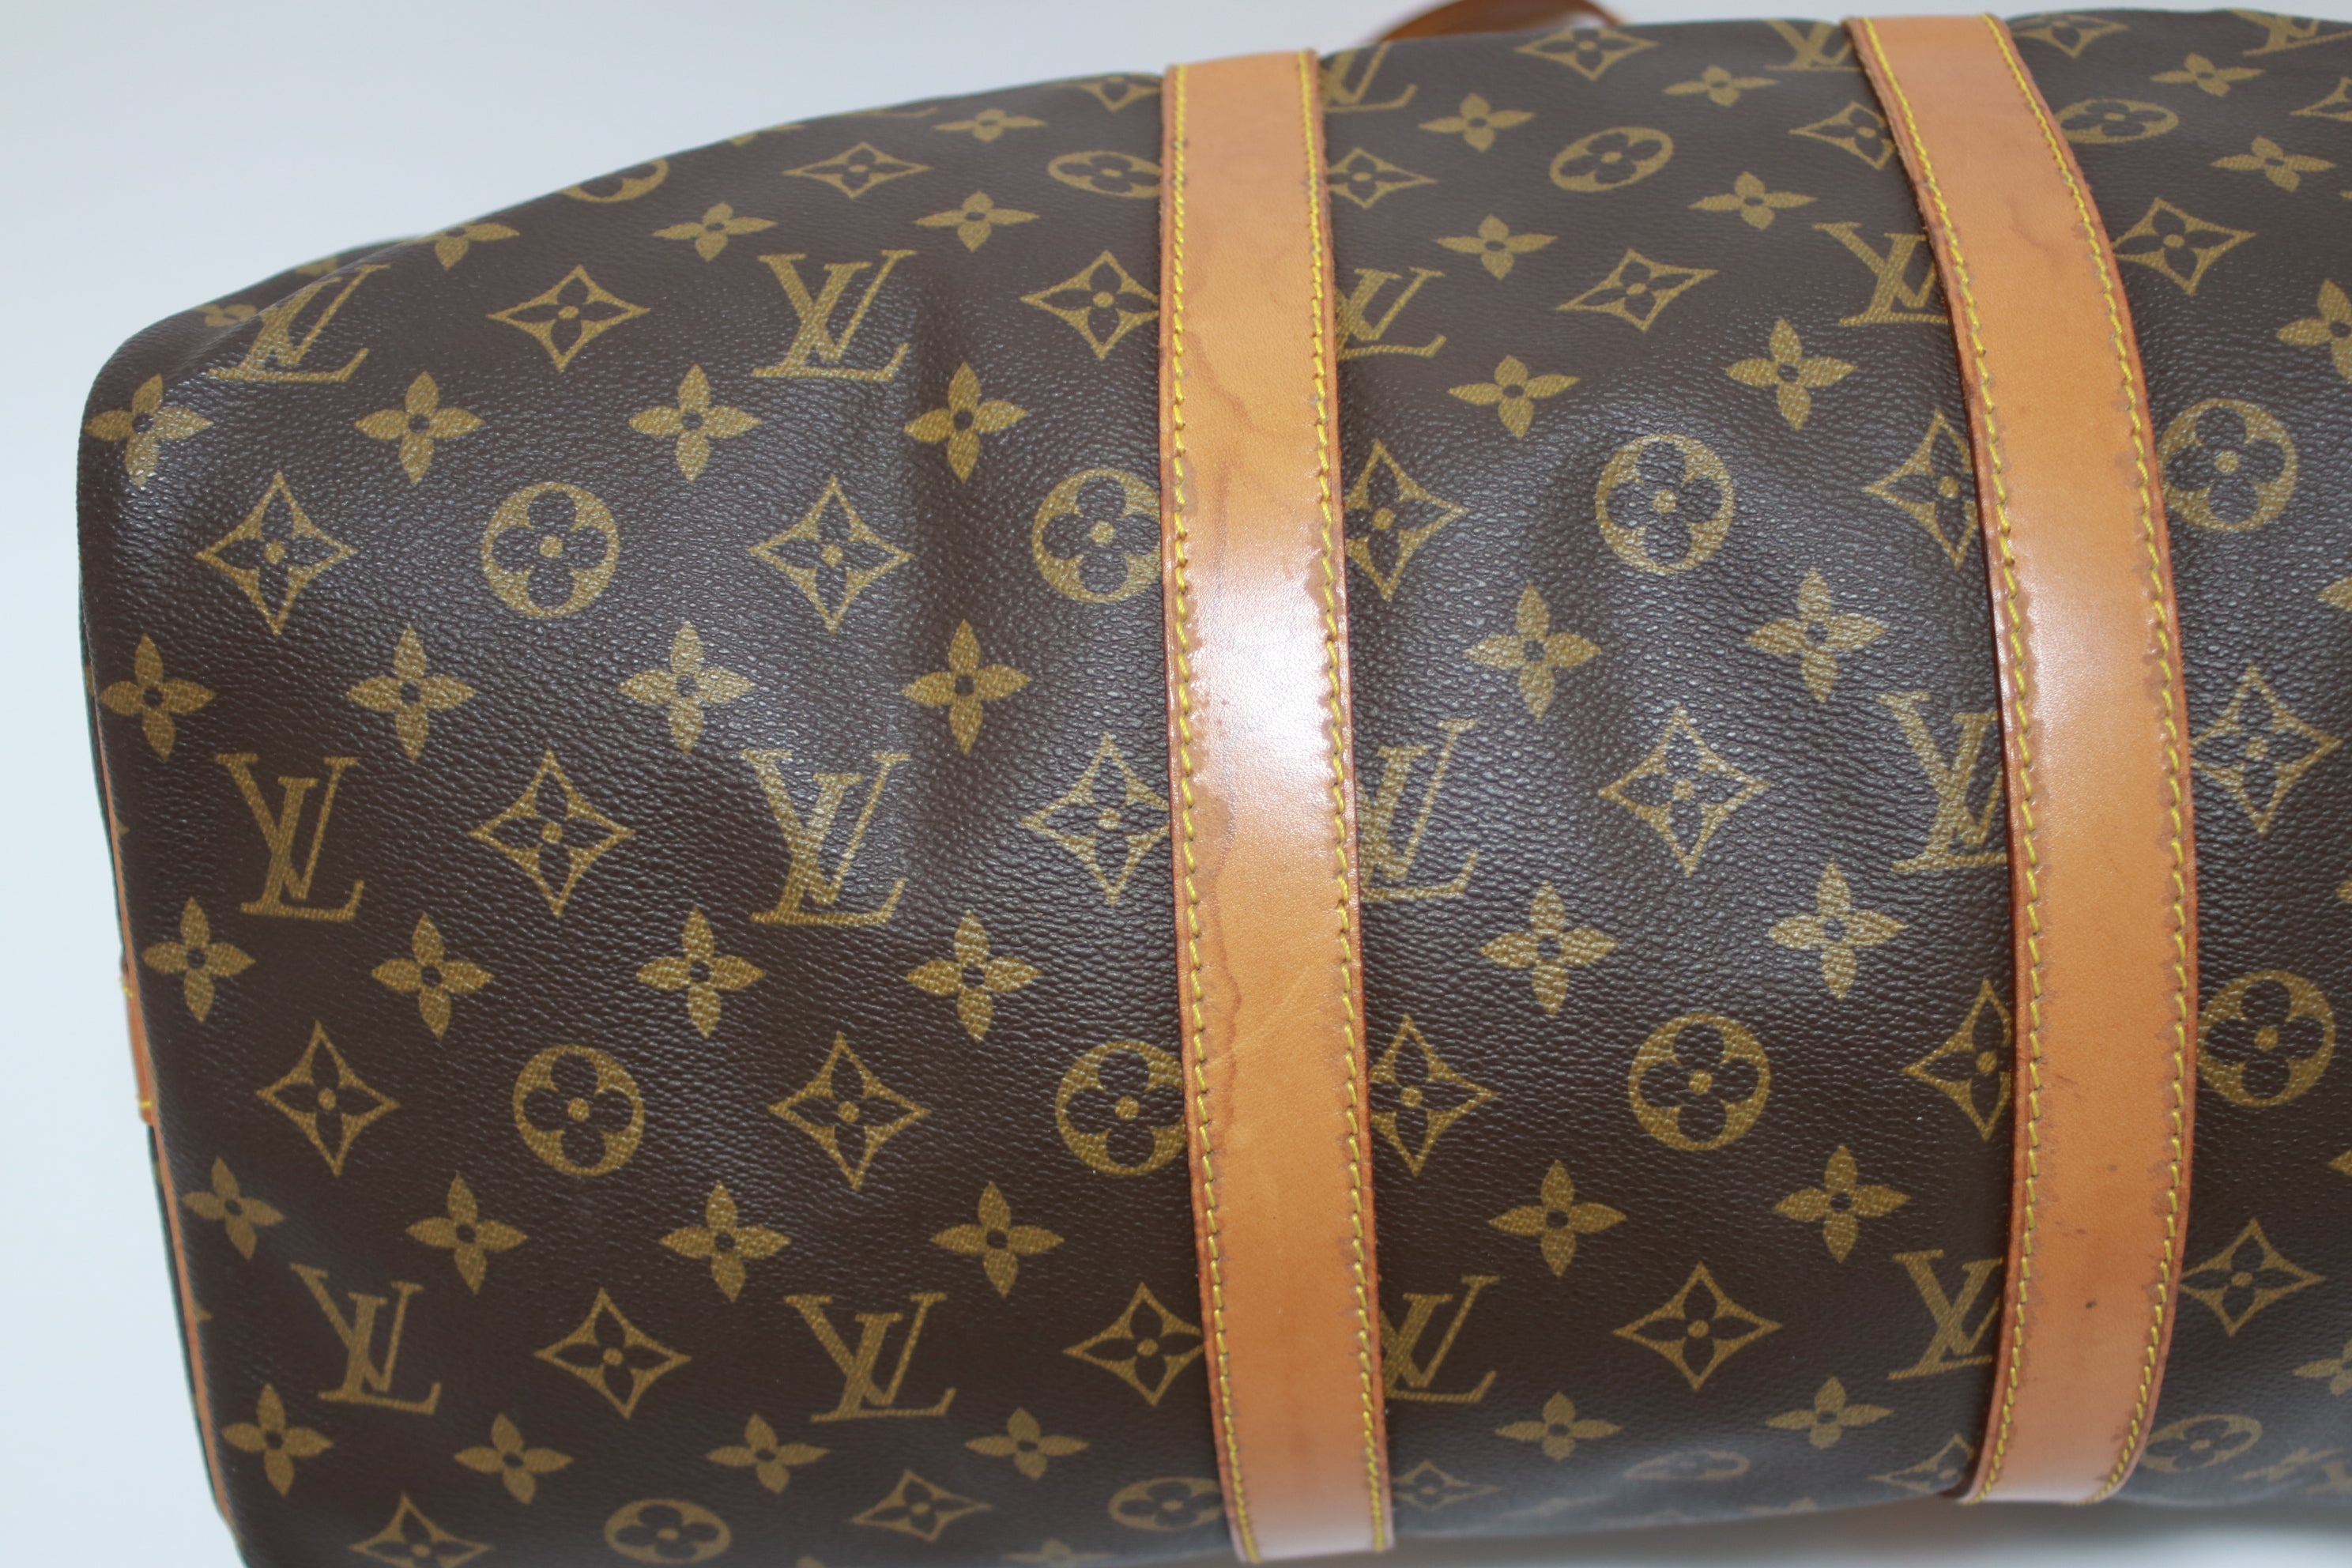 Louis Vuitton Keepall 45 Bandouliere Used (7640)